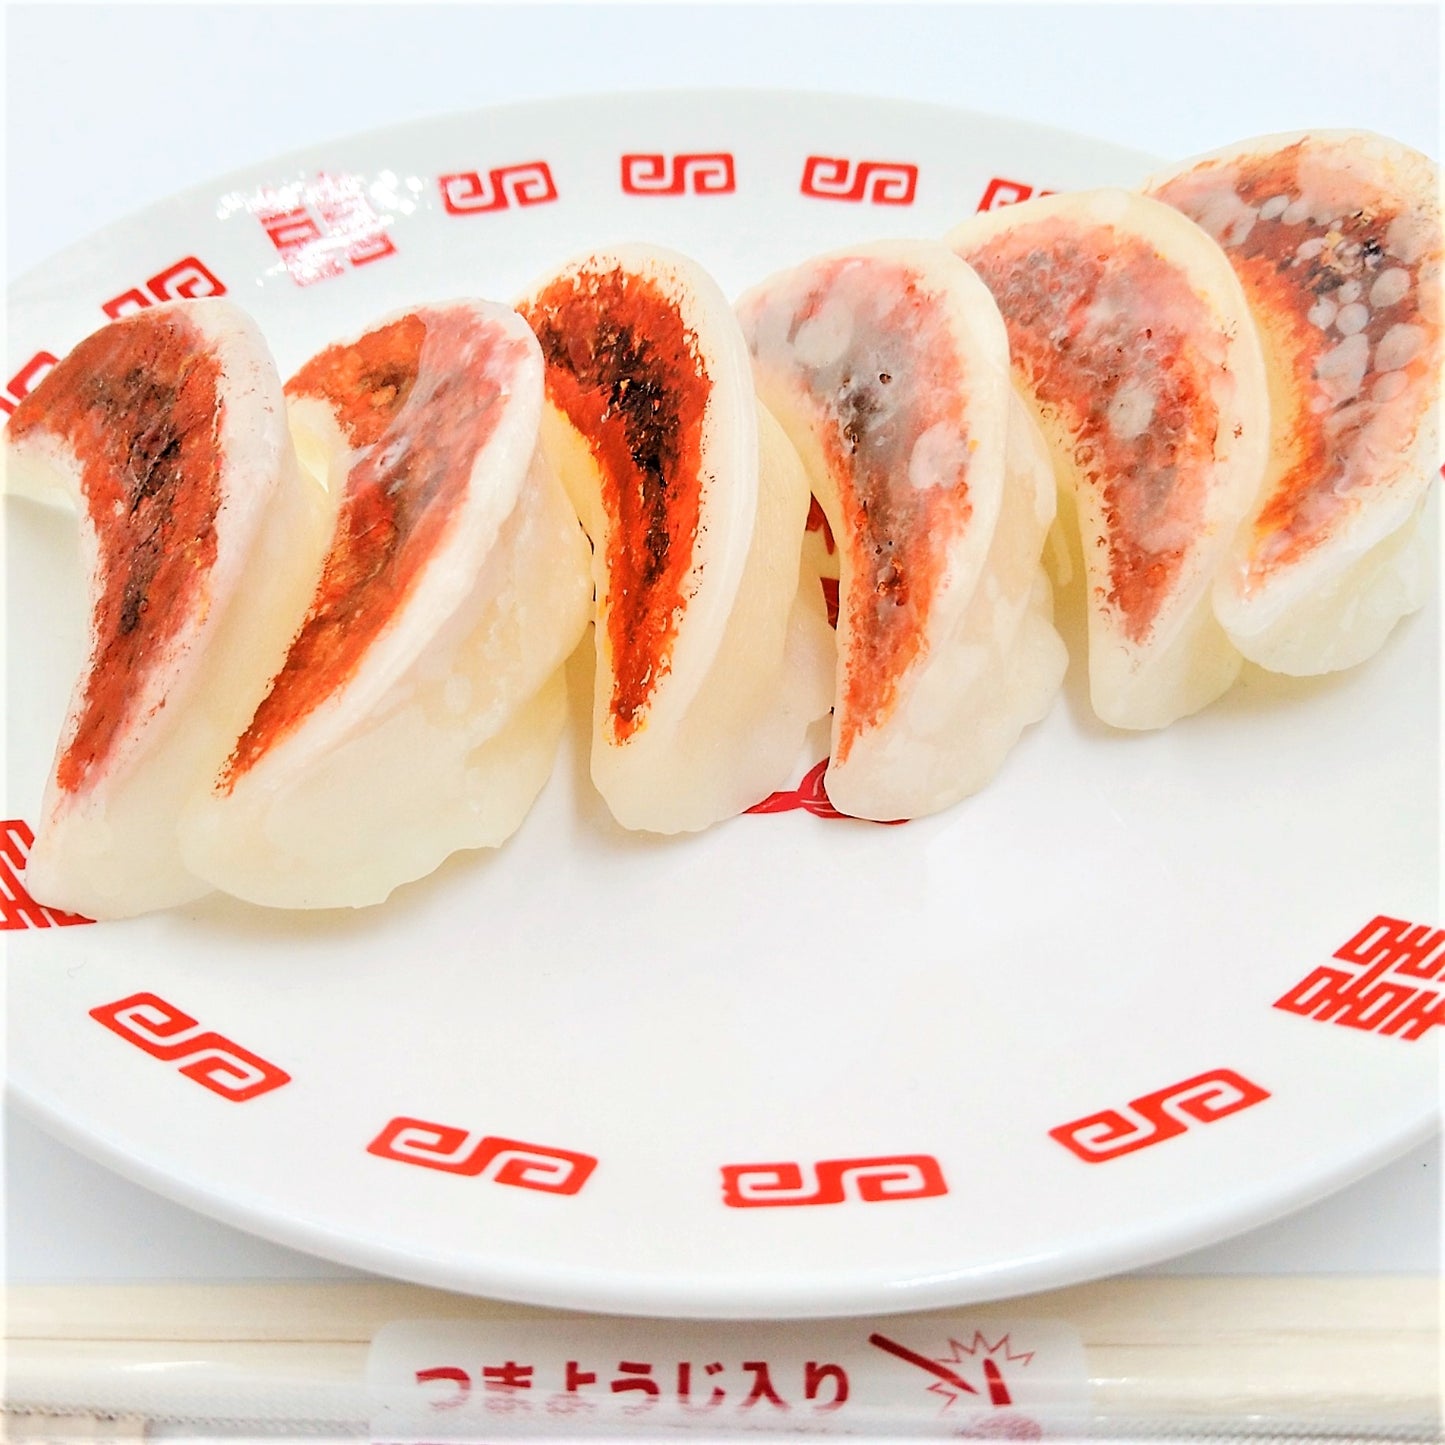 Grilled dumpling-style candles Grilled dumpling-style candles from a popular Chinese restaurant in Japan